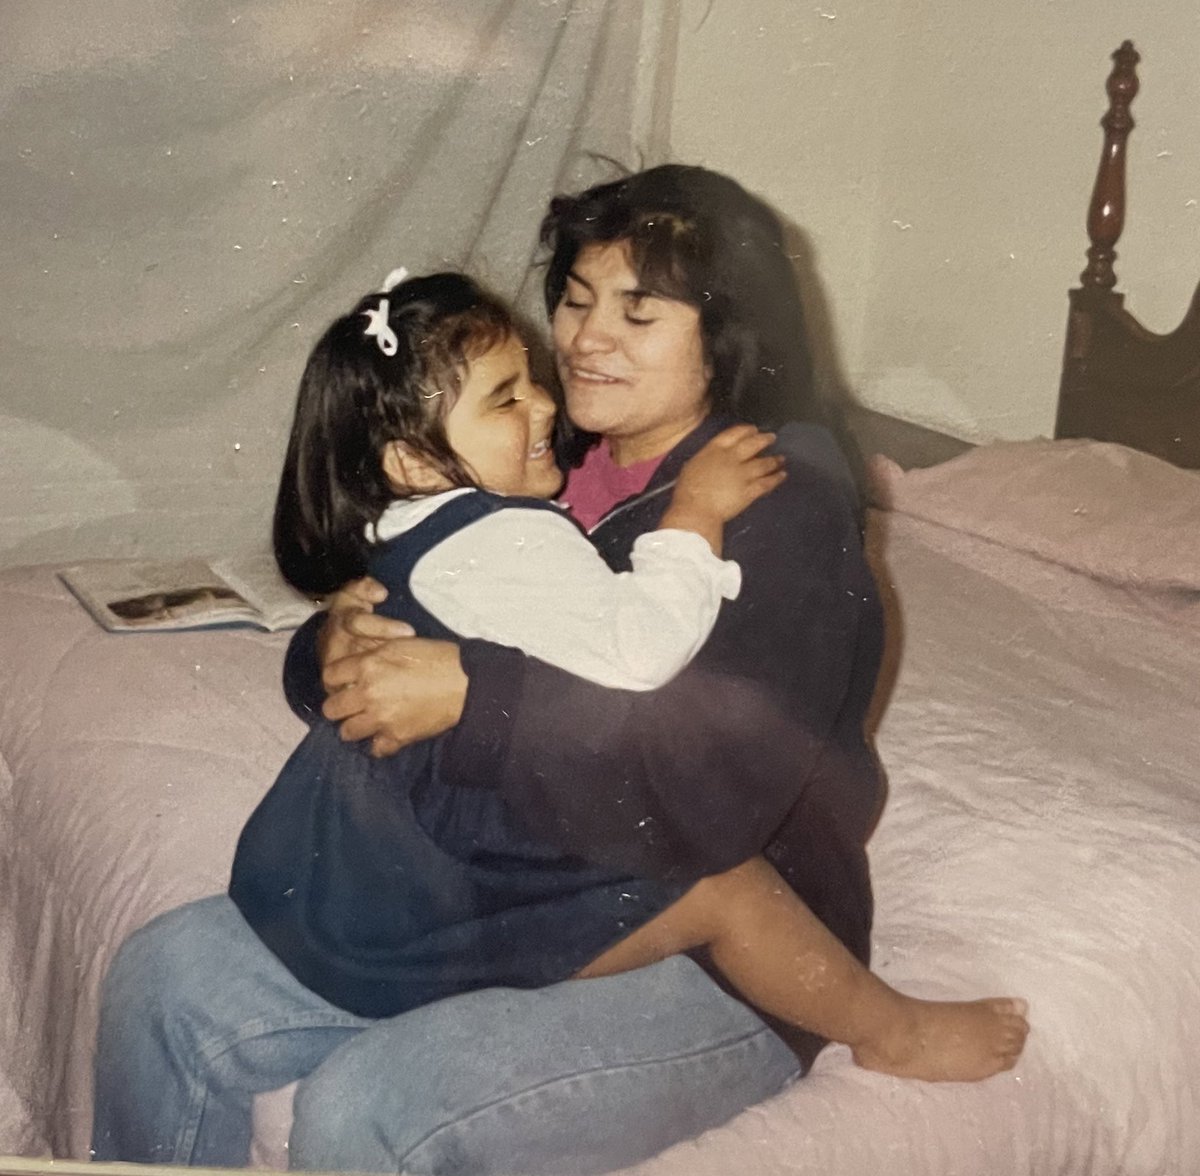 My mom is my everything. She’s the strongest and most resilient woman I know and I hope that one day I can be as strong as she is. Feliz Dia de los Madres to all the moms out there and to all the mom figures in peoples lives.